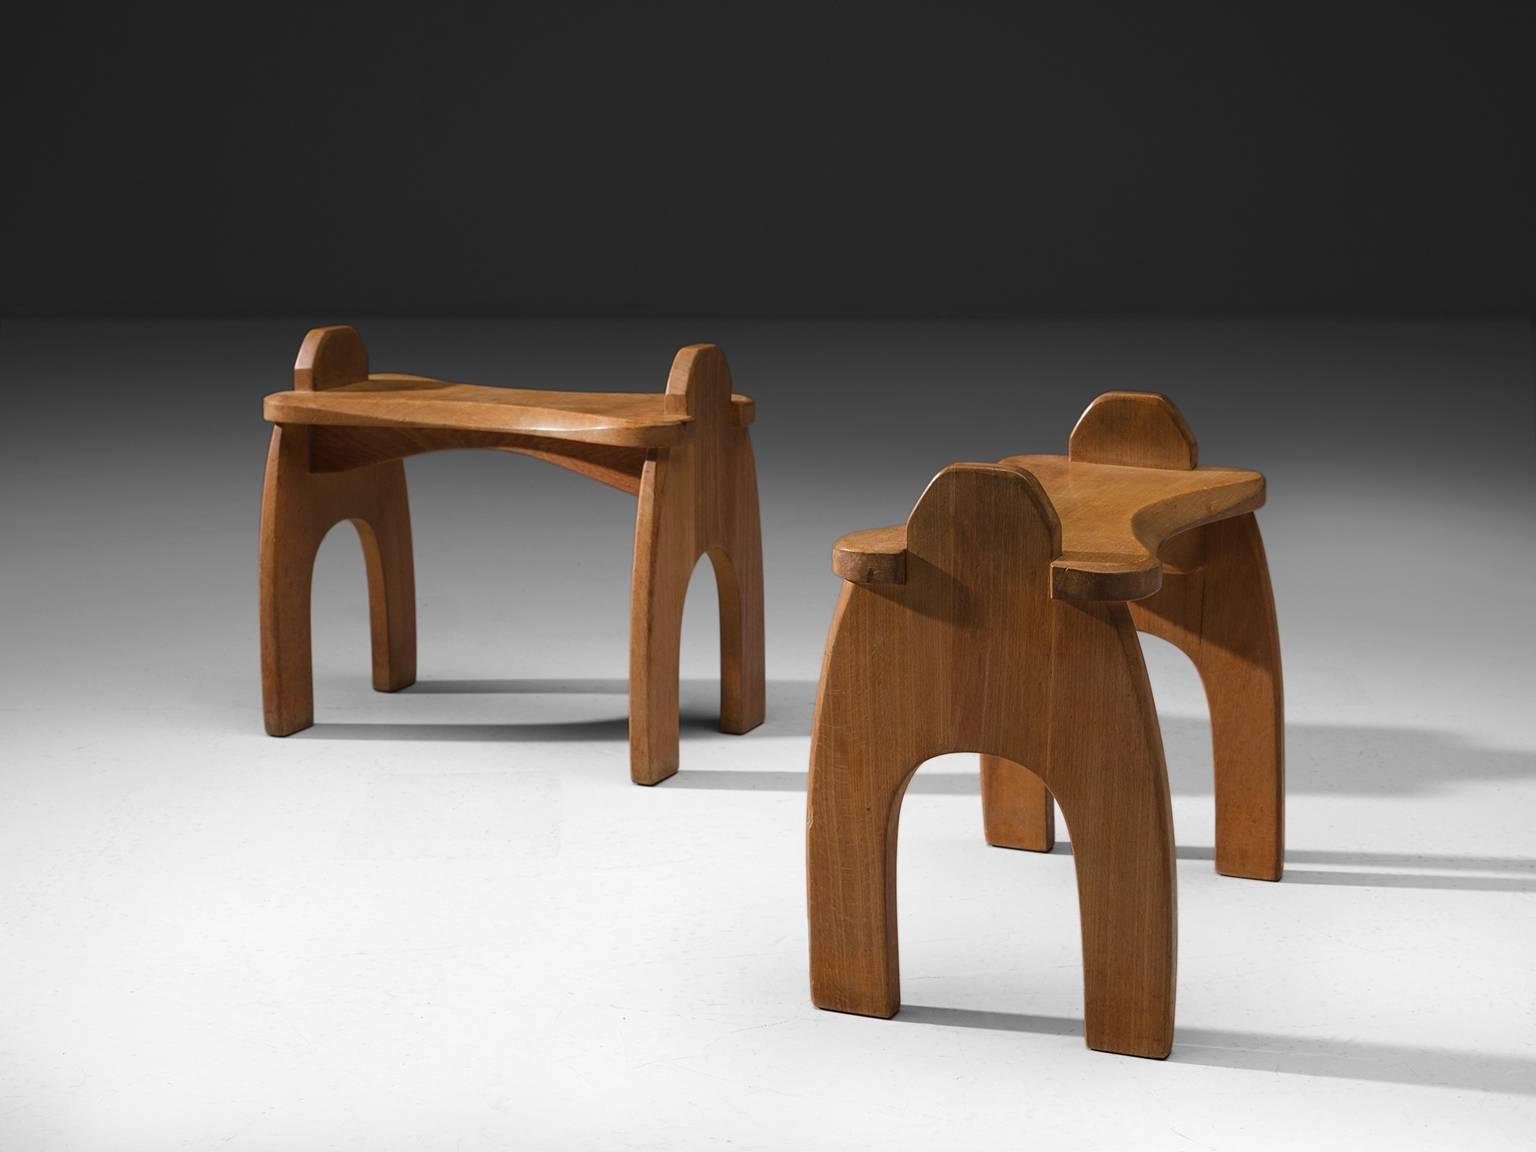 Mid-Century Modern Pair of Wooden Stools, Solid Oak, 1950s, Europe